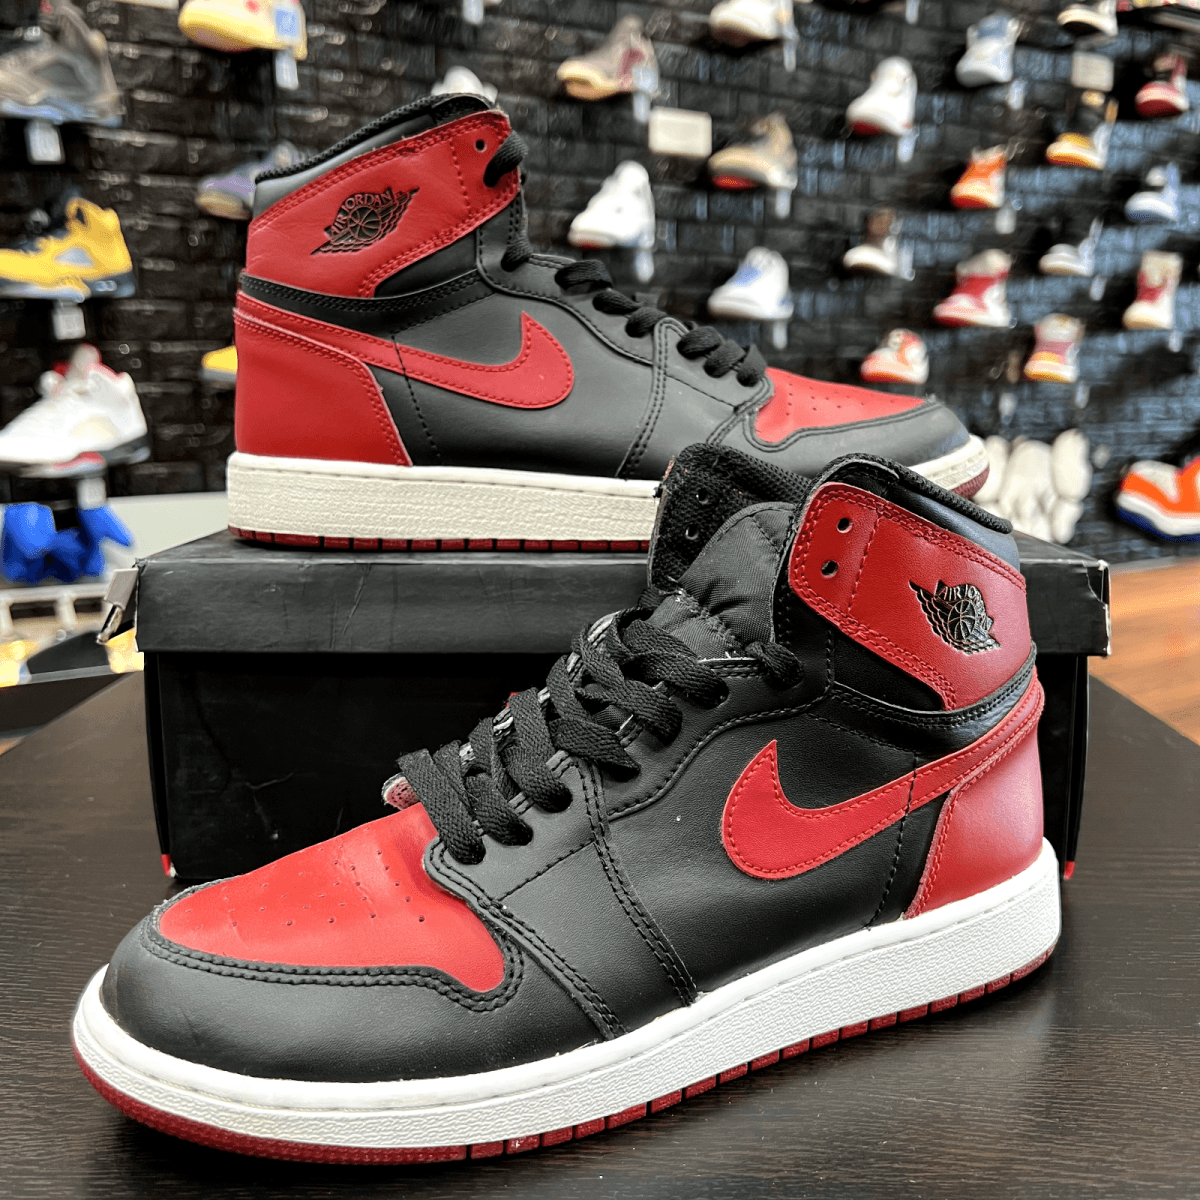 Jordan 1 Banned (2020) - Gently Enjoyed (Used) Rep Box School 7 - Jawns on Fire